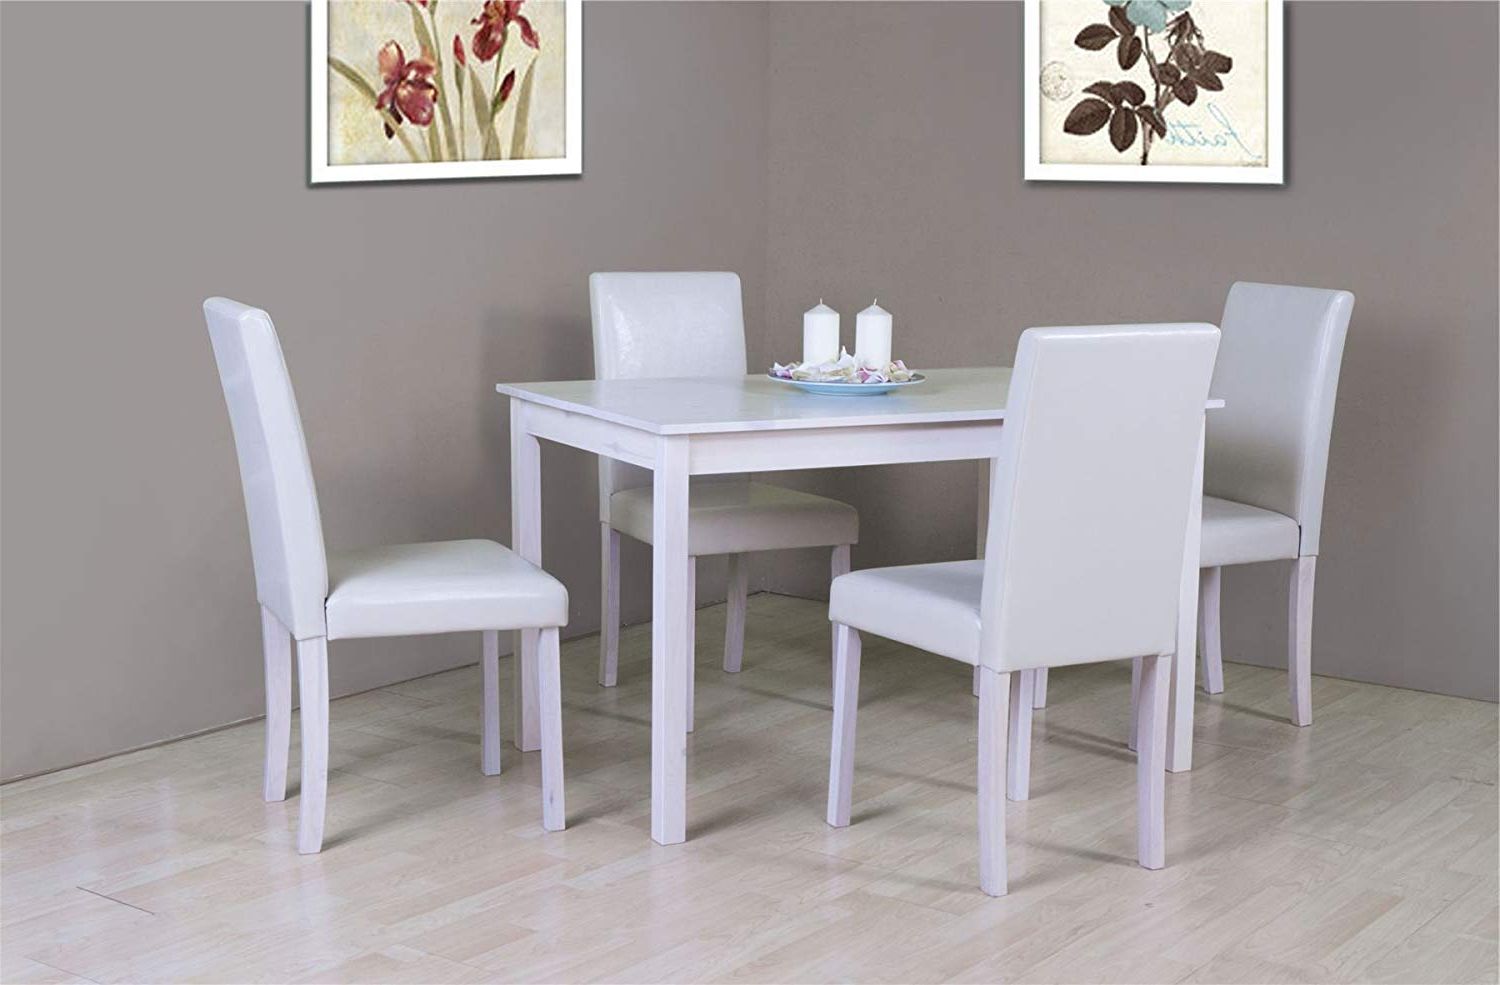 Gray Wash Lorraine Extending Dining Tables Intended For Current Abakus Direct Polo White/cream Oak Effect Wooden Dining Table And 4 High  Back Chair Set (View 19 of 25)